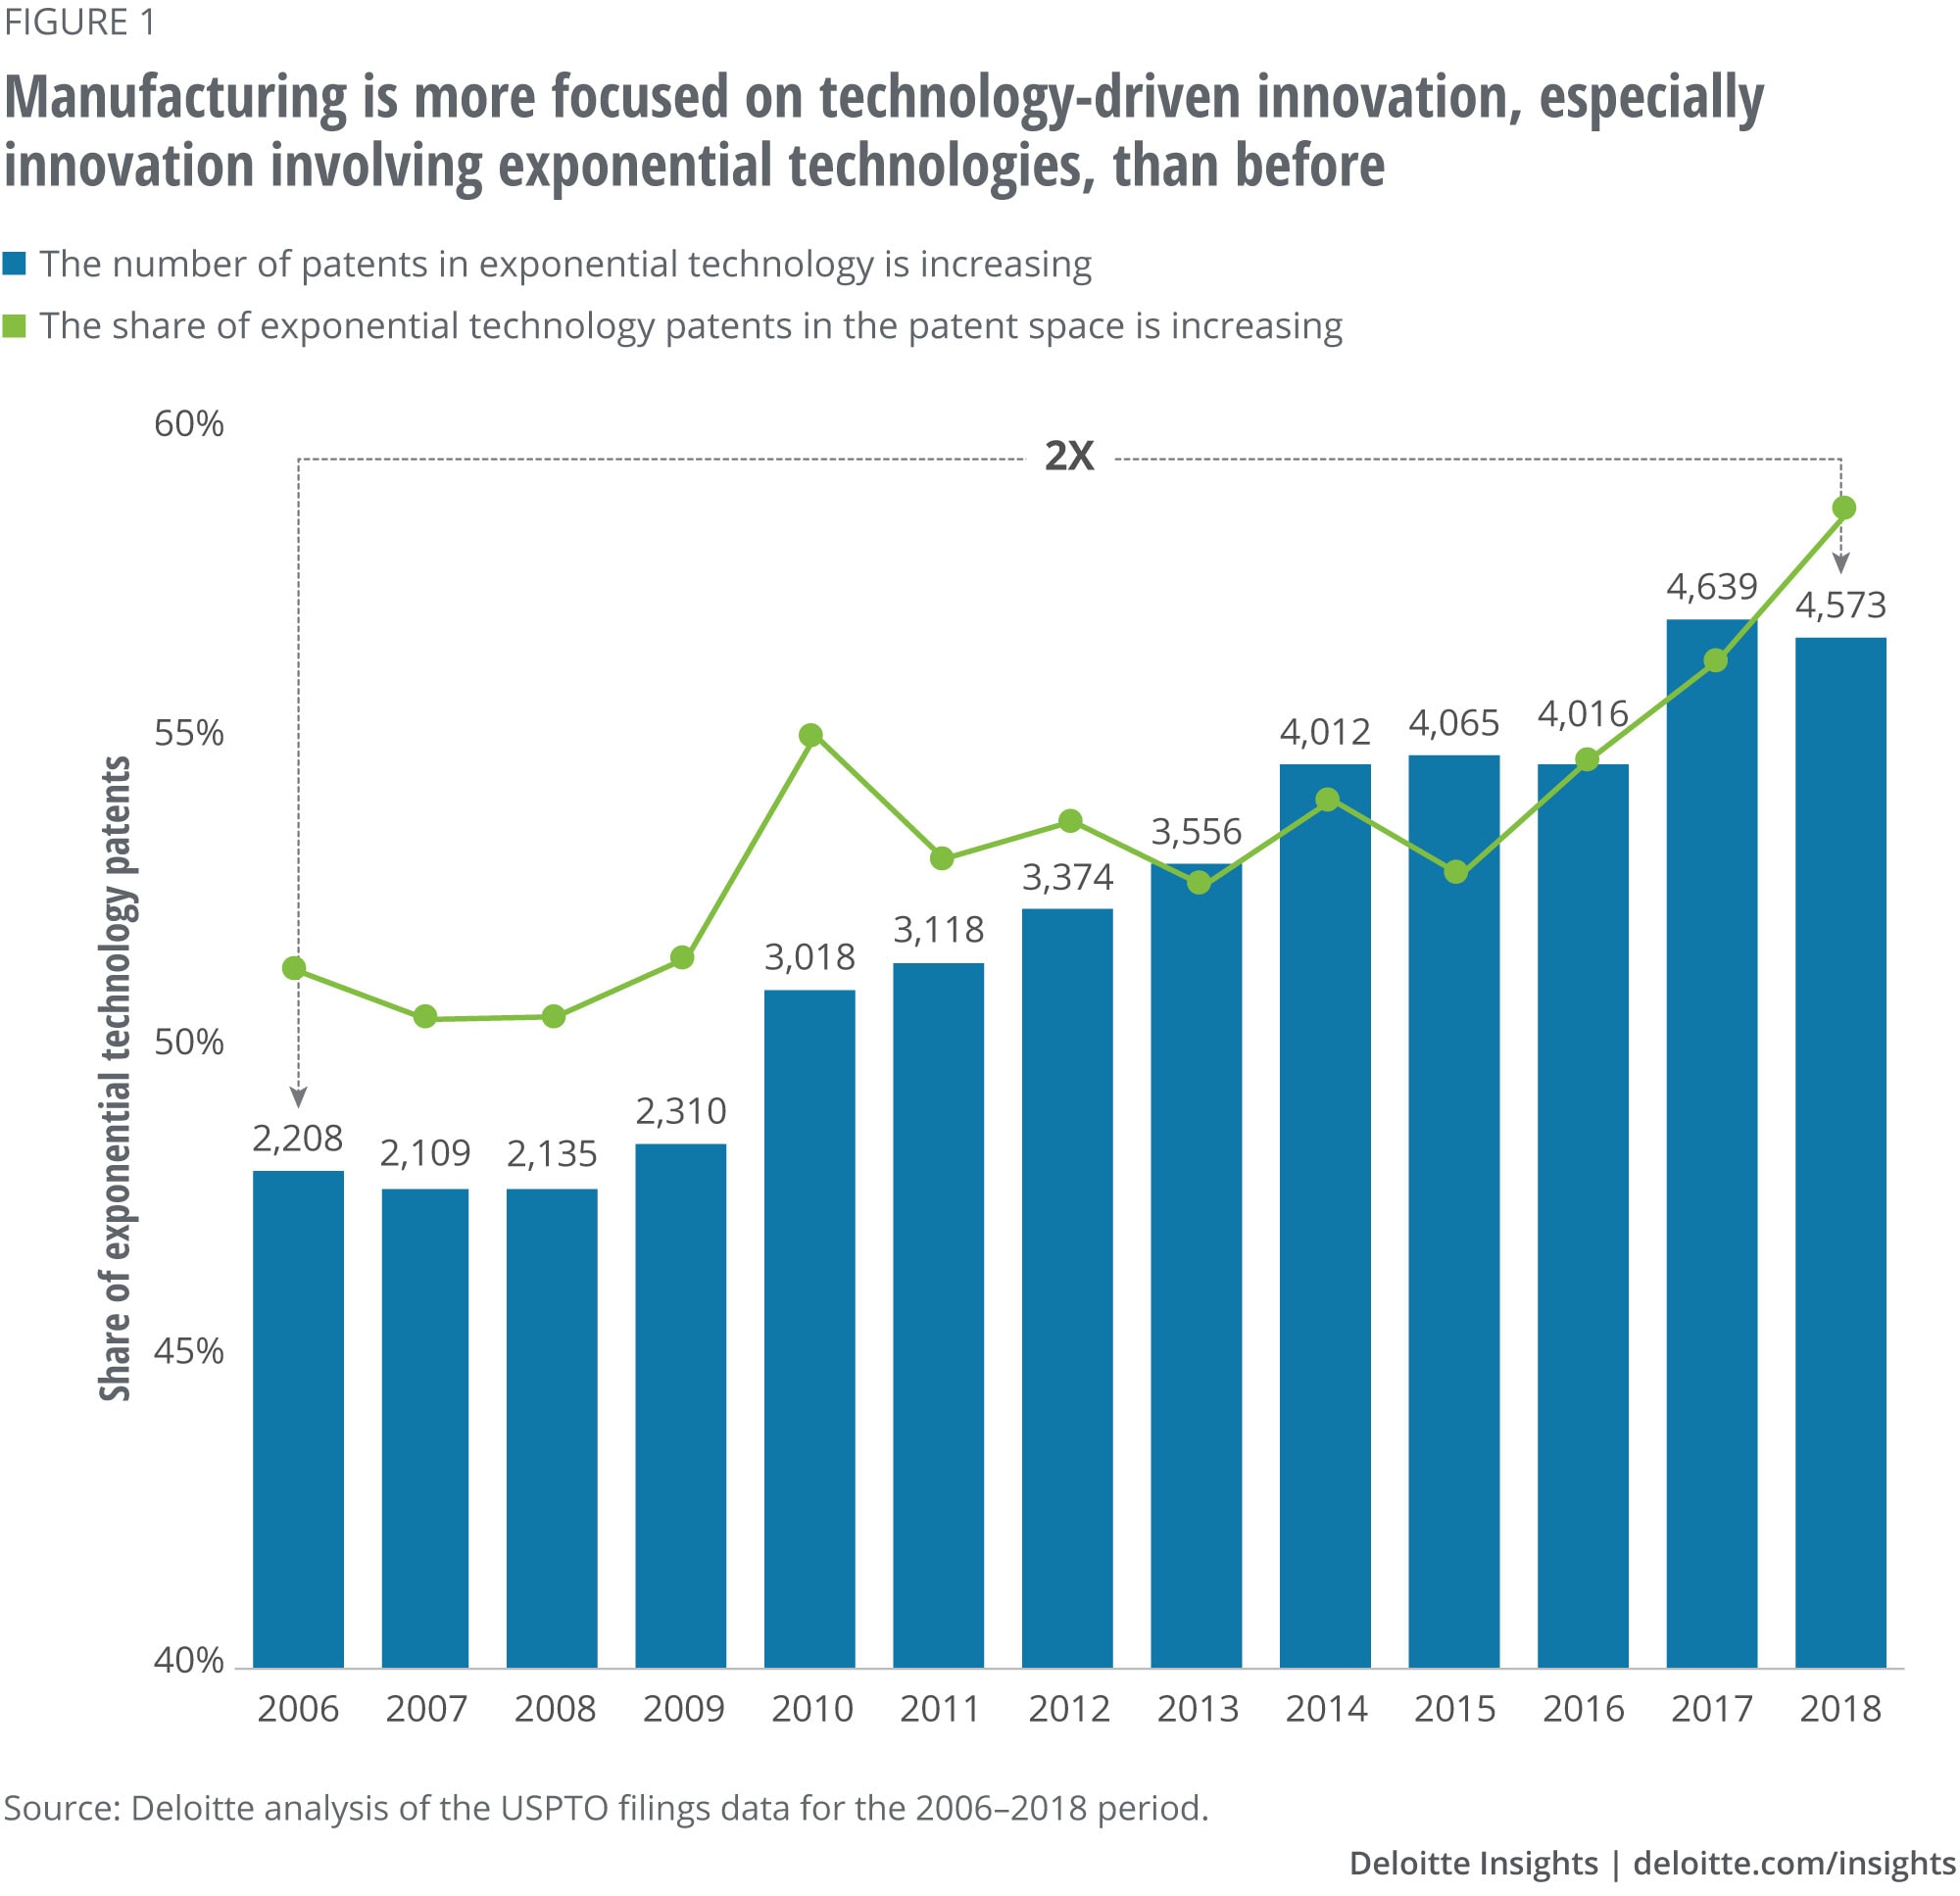 Manufacturing is more focused on technology-driven innovation, especially innovation involving exponential technologies, than before